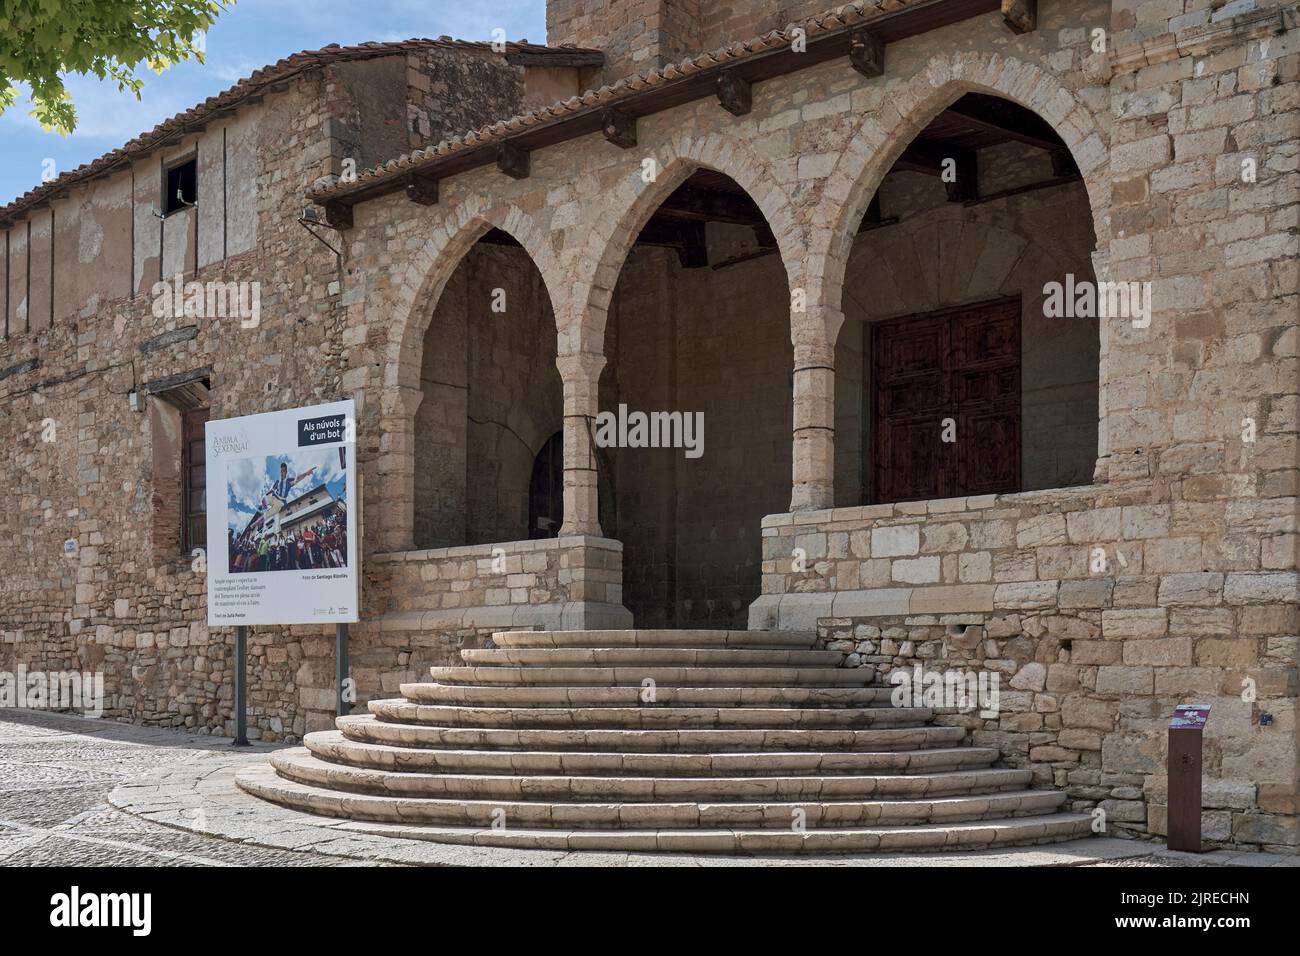 The old convent of San Francisco under construction to be a tourist hostel in the town of Morella, Castellon province, Spain, Europe Stock Photo